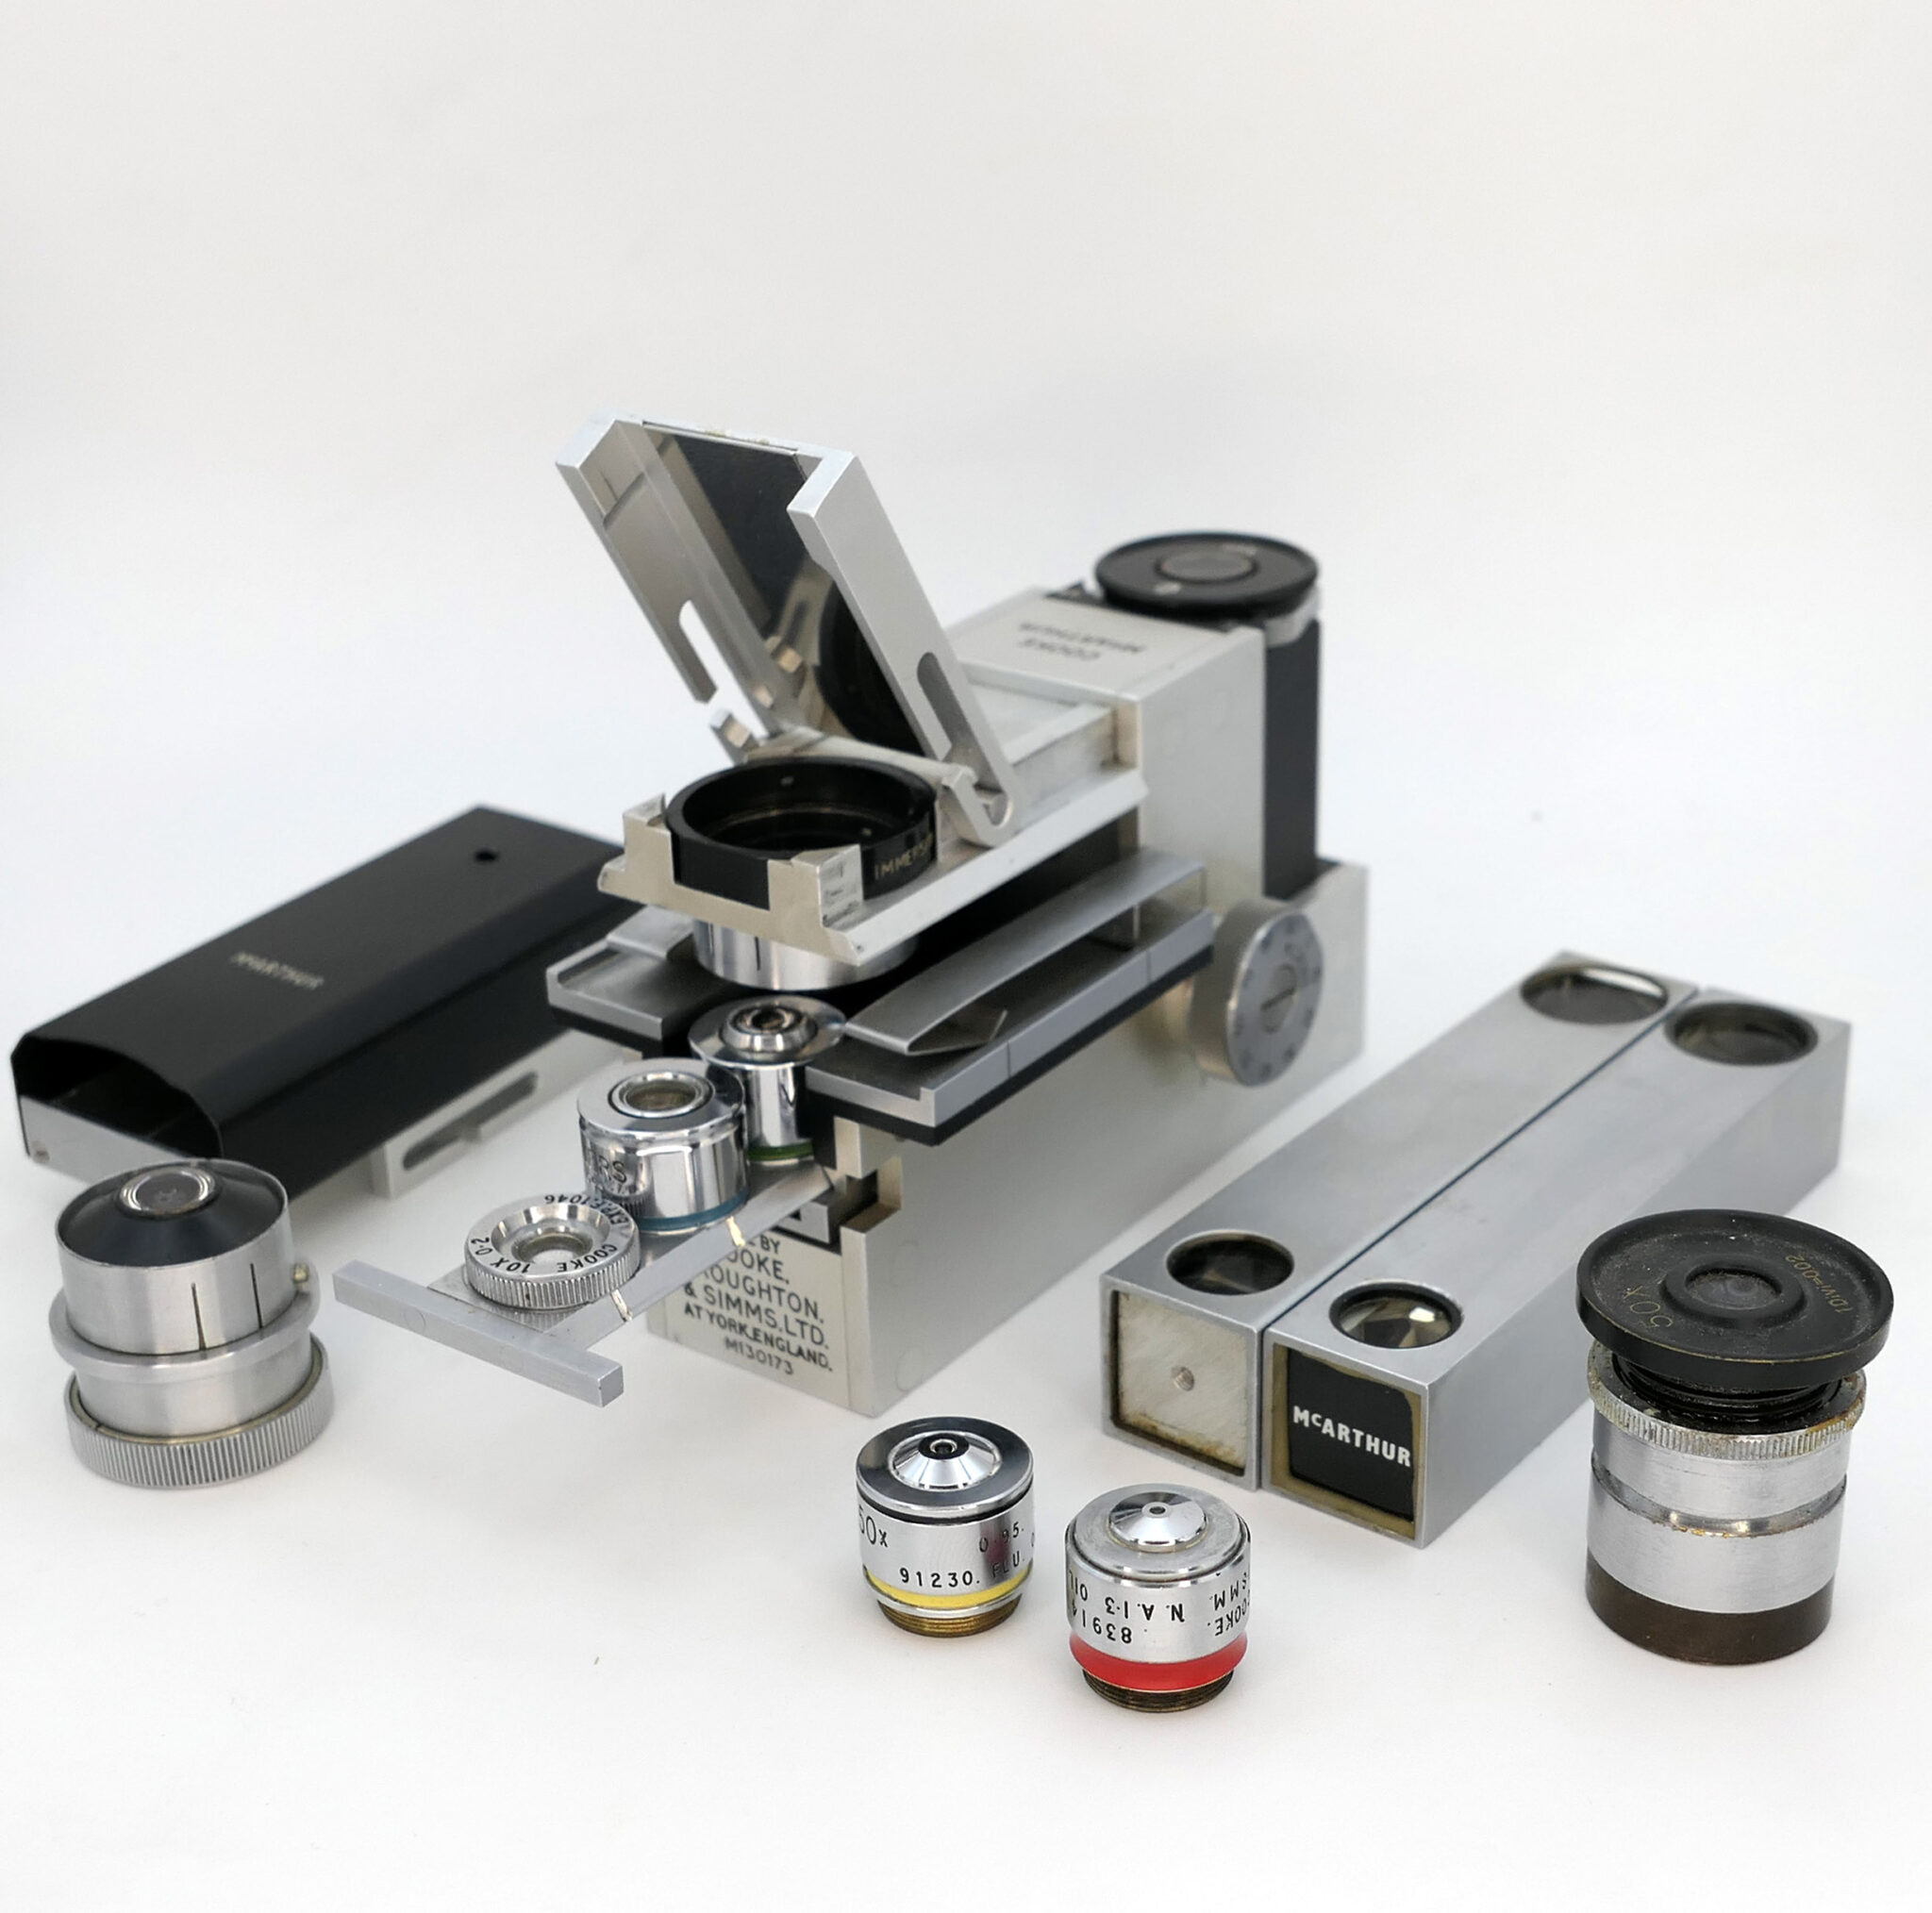 Fine CTS McArthur microscope with accessories